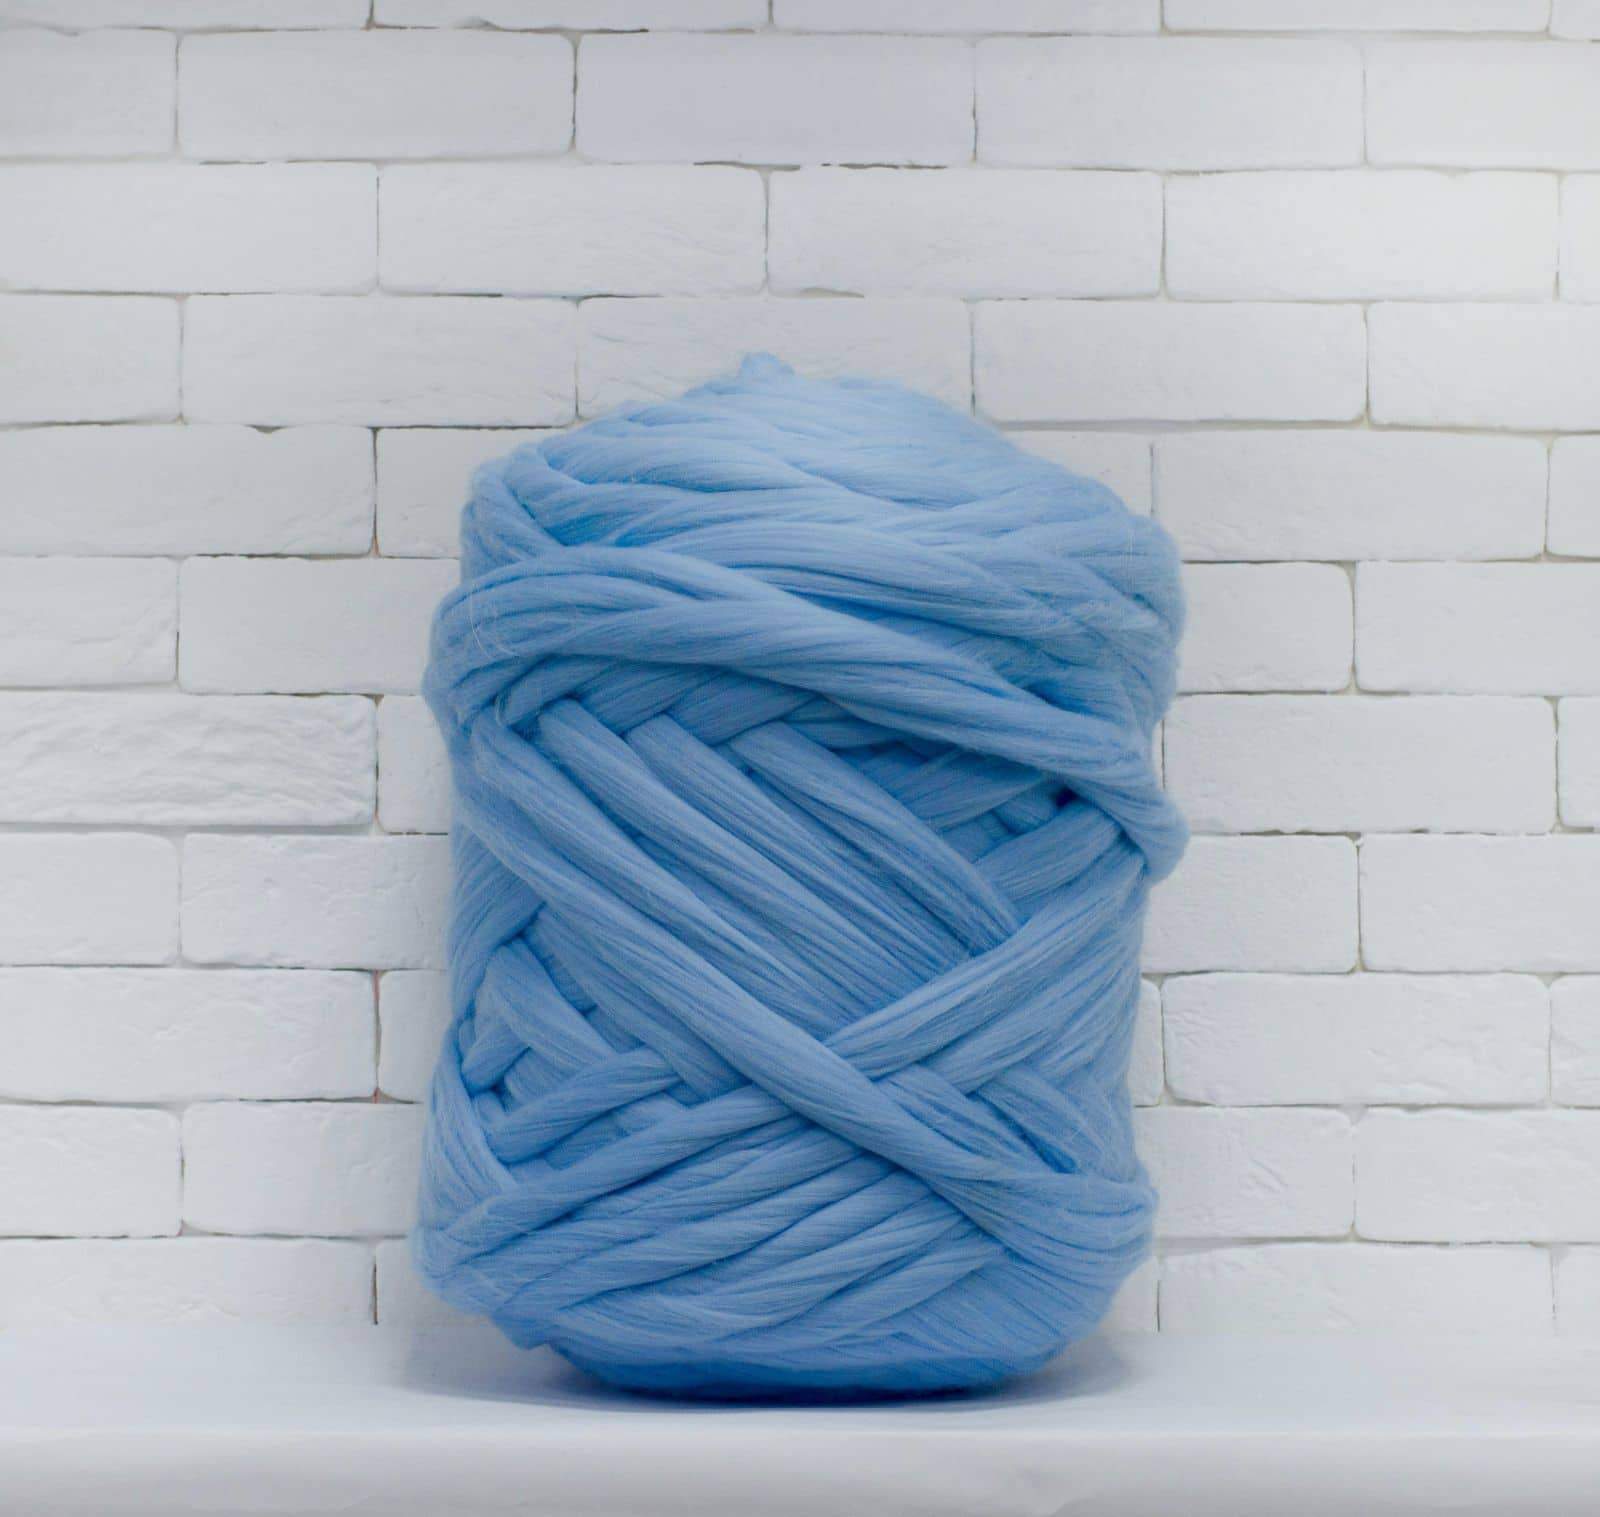 Super Chunky Bulky Merino Wool | Best Yarn for Learning How to Knit